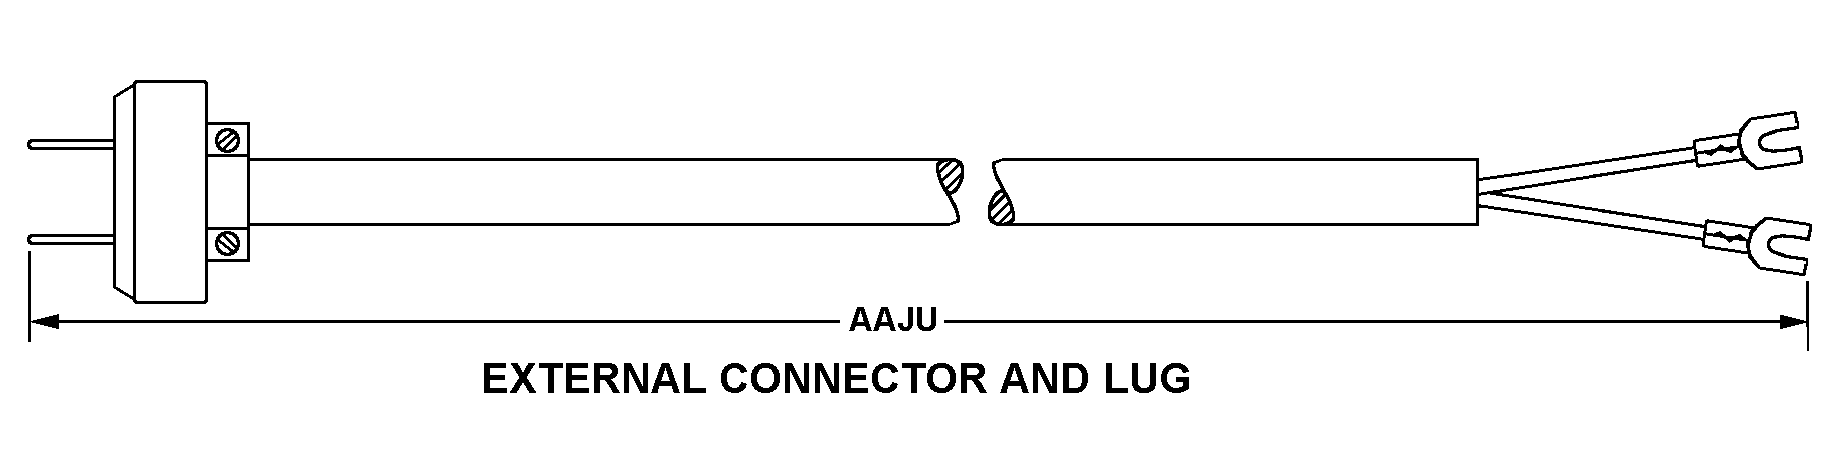 EXTERNAL CONNECTOR AND LUG style nsn 5995-01-333-3361